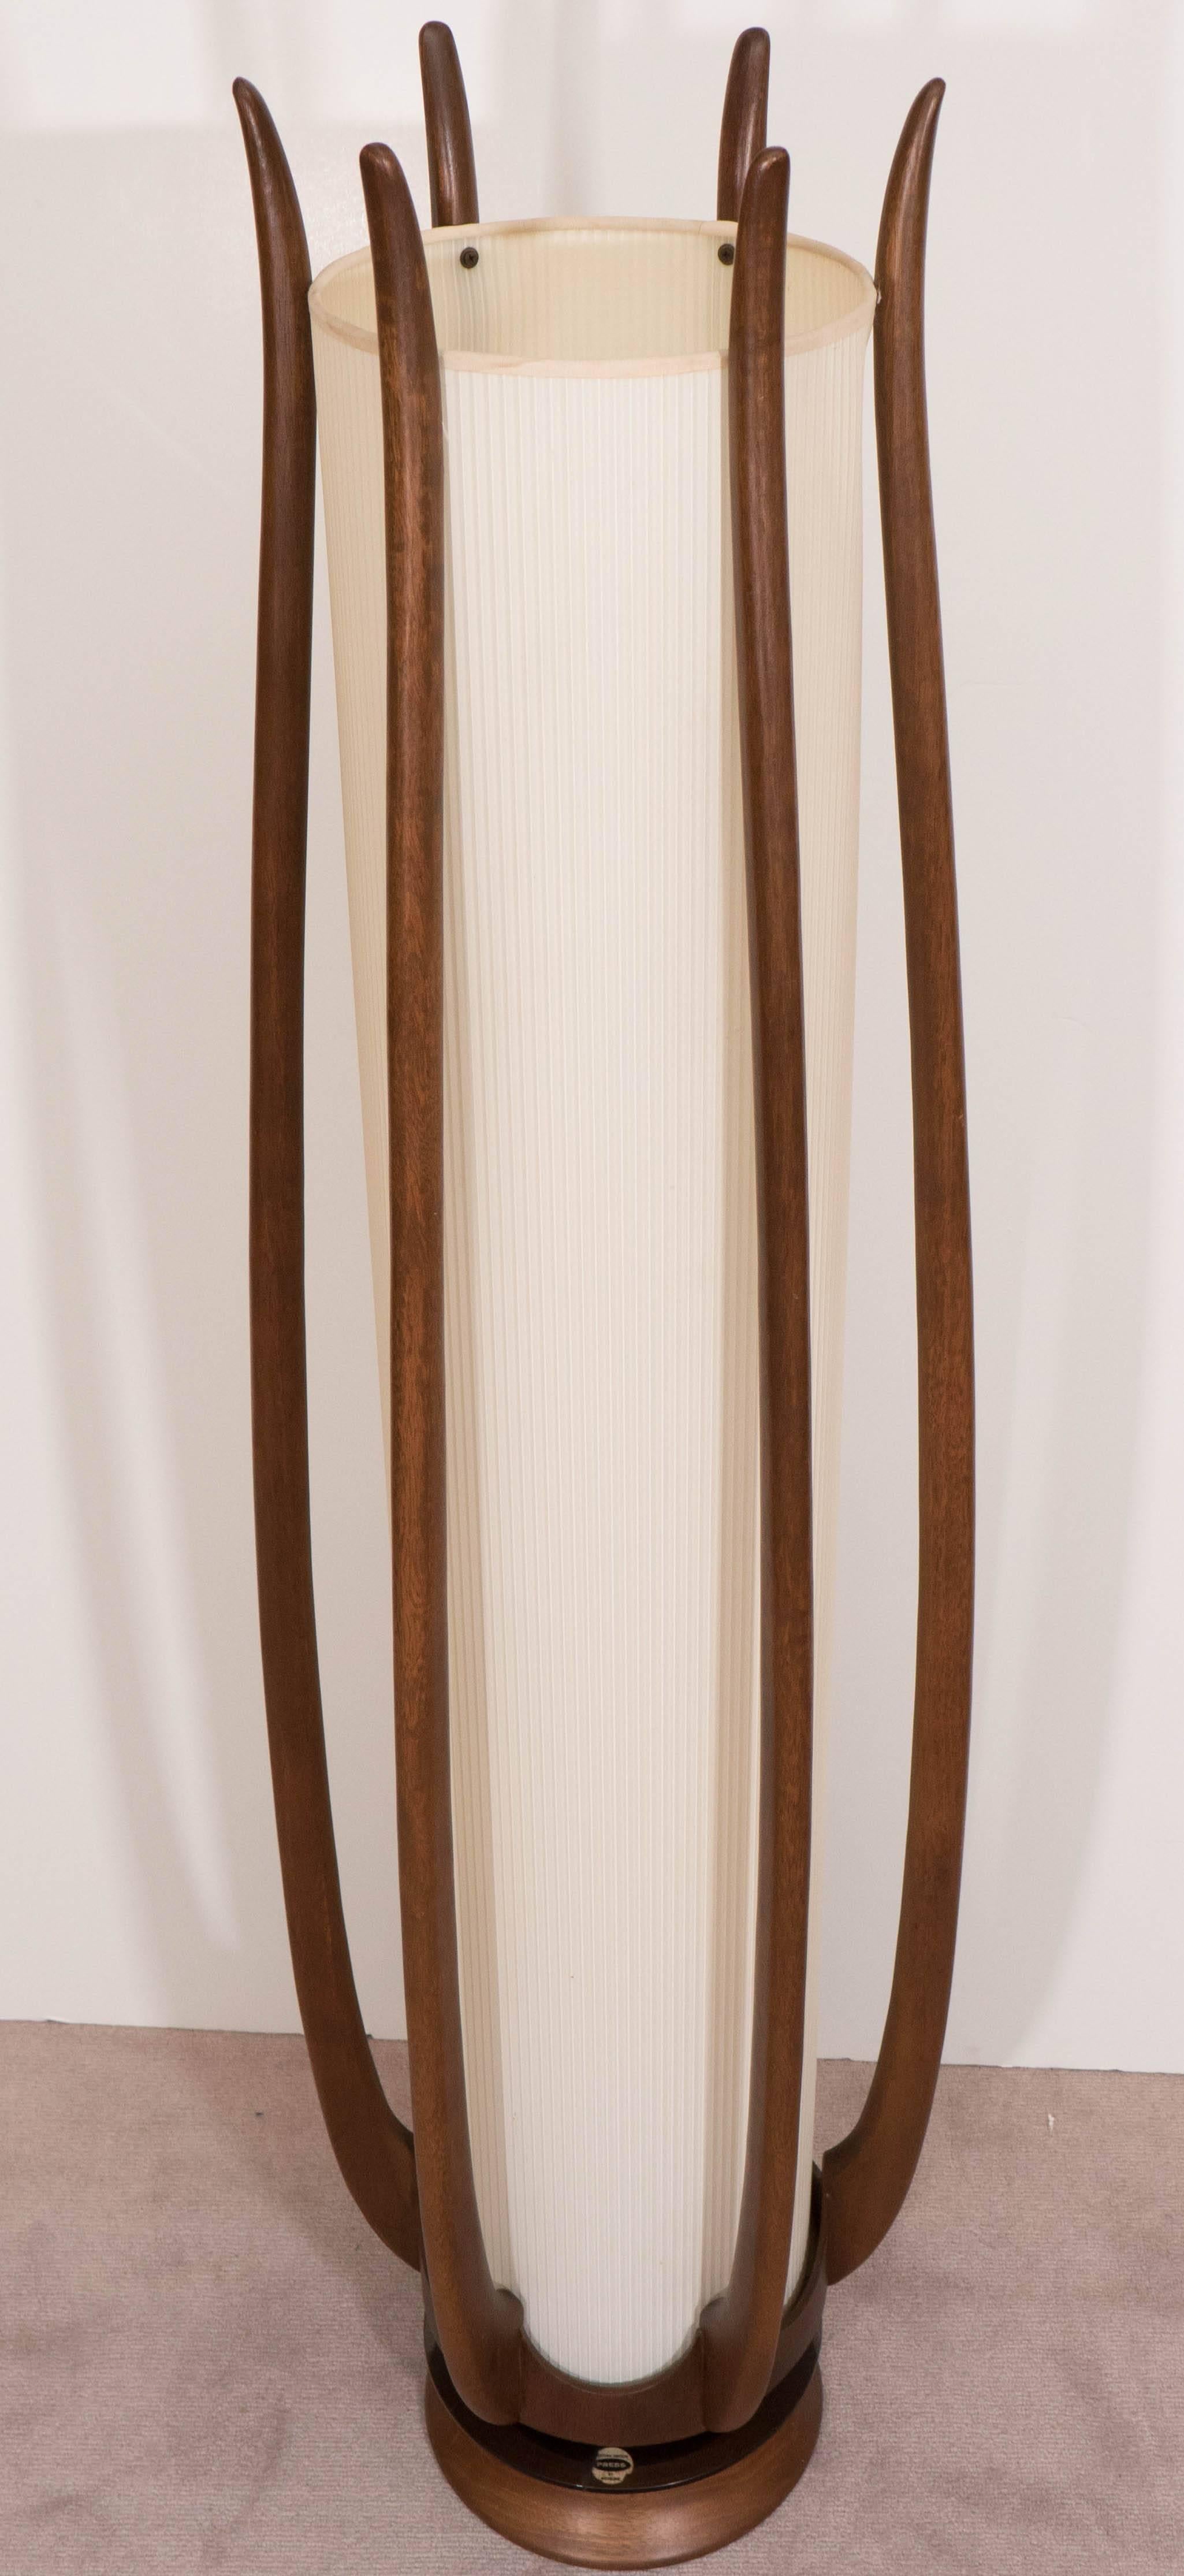 20th Century Modeline Sculptural Floor Lamp with Linen Shade and Curved Wood Frame